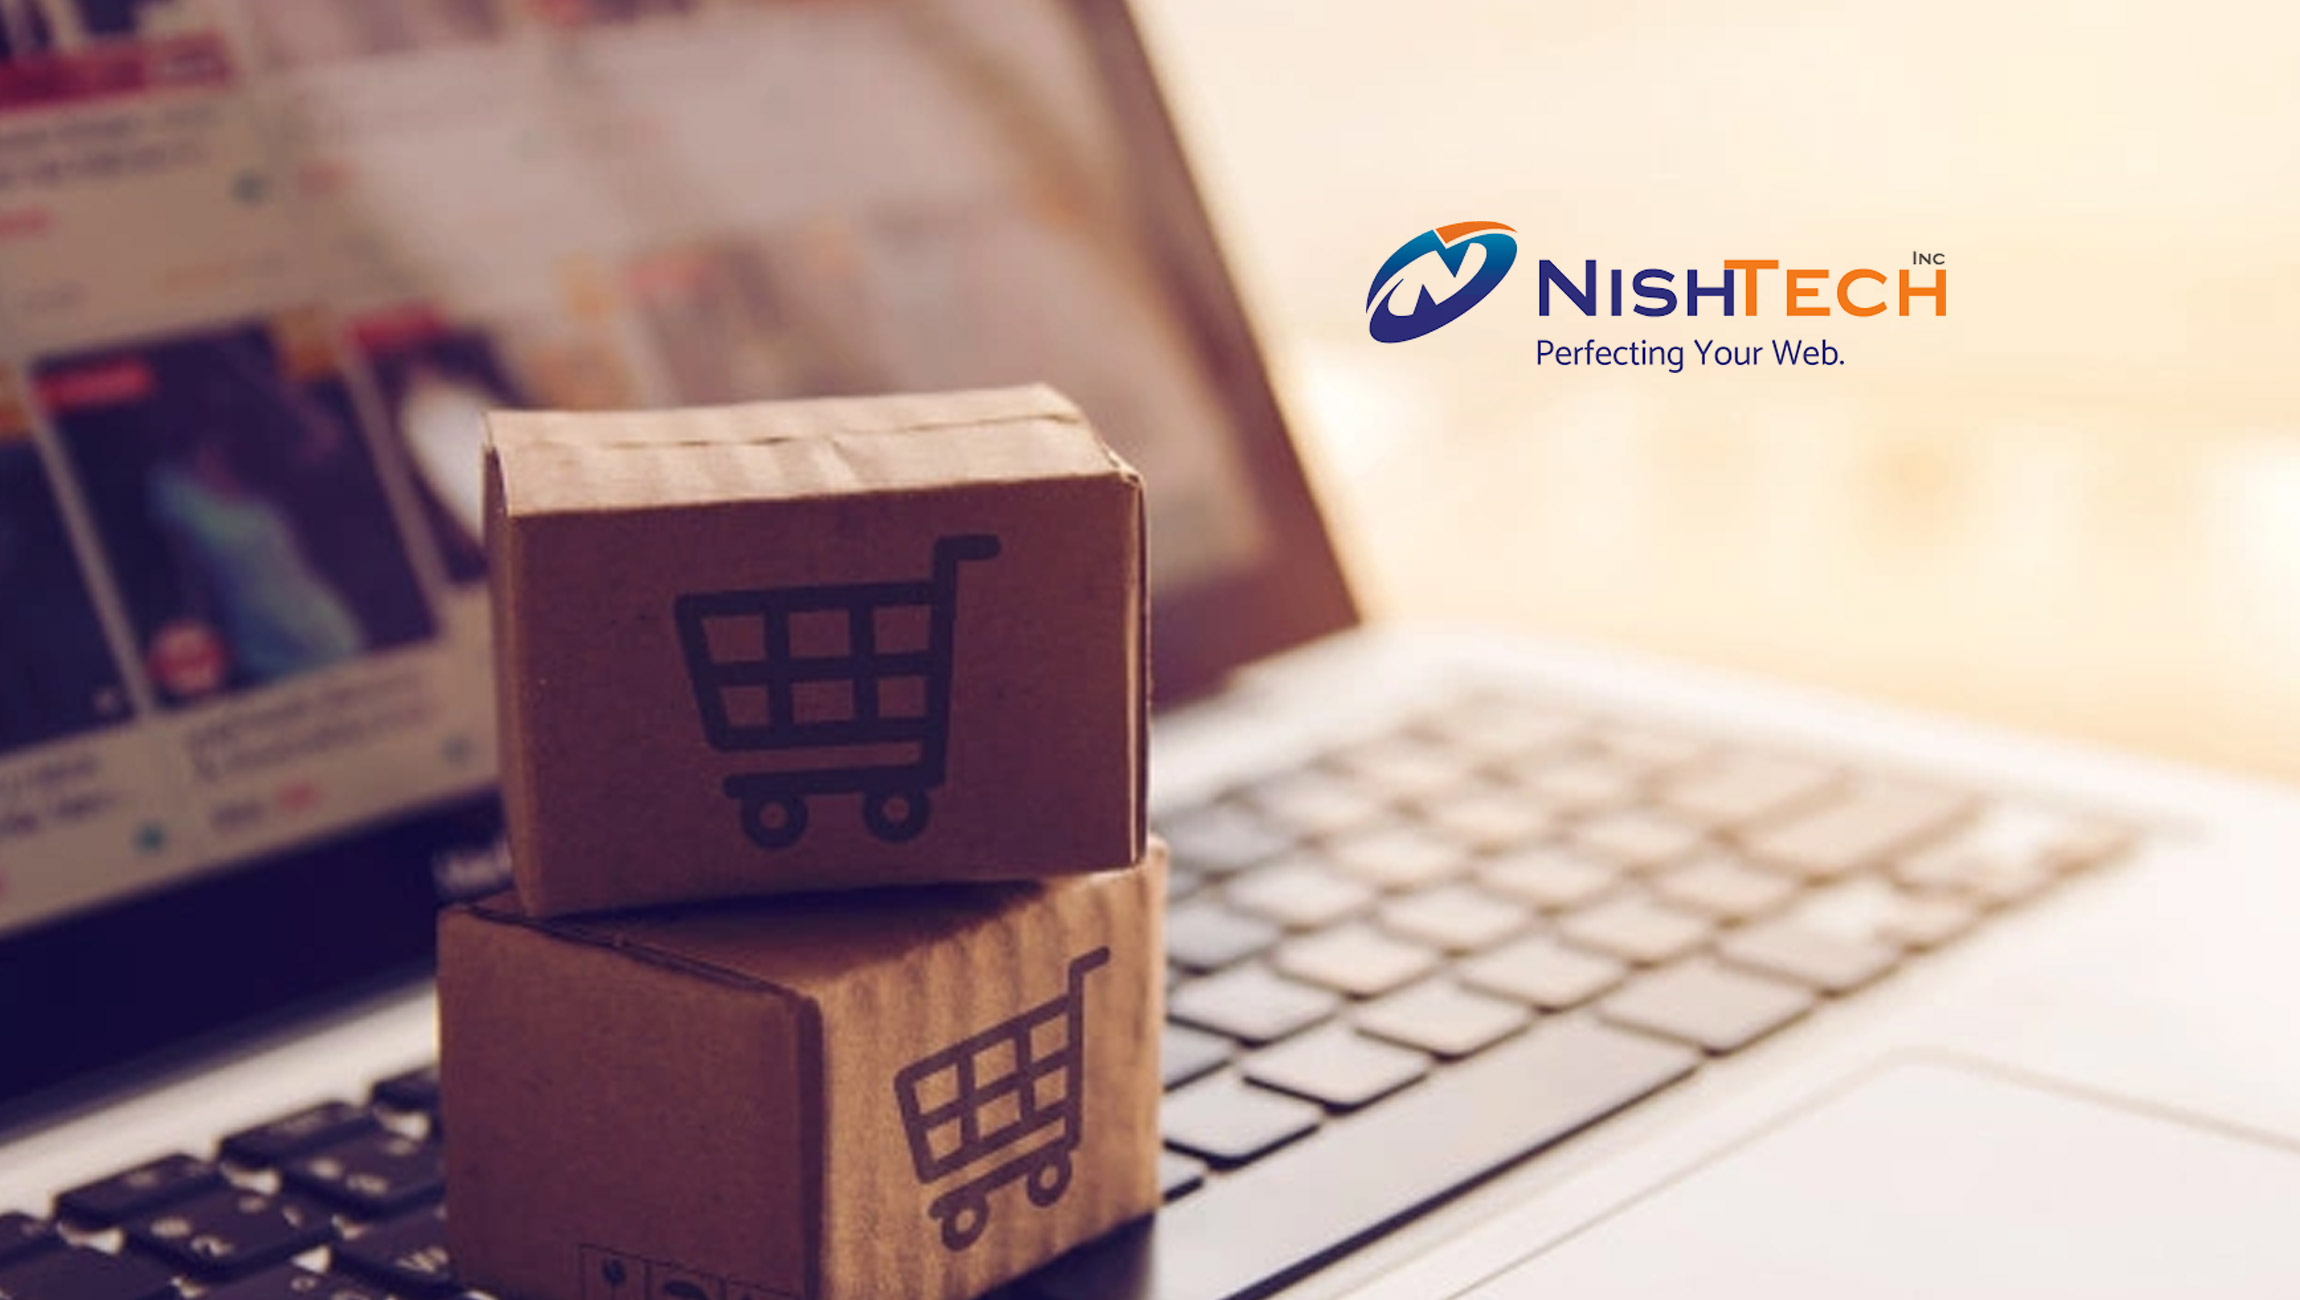 Episerver (Optimizely) B2B Commerce Accelerator By Nish Tech Is A Fully Customizable E-commerce Solution That Allows Brands To Deliver Rich, Personalized B2B Shopping Experiences